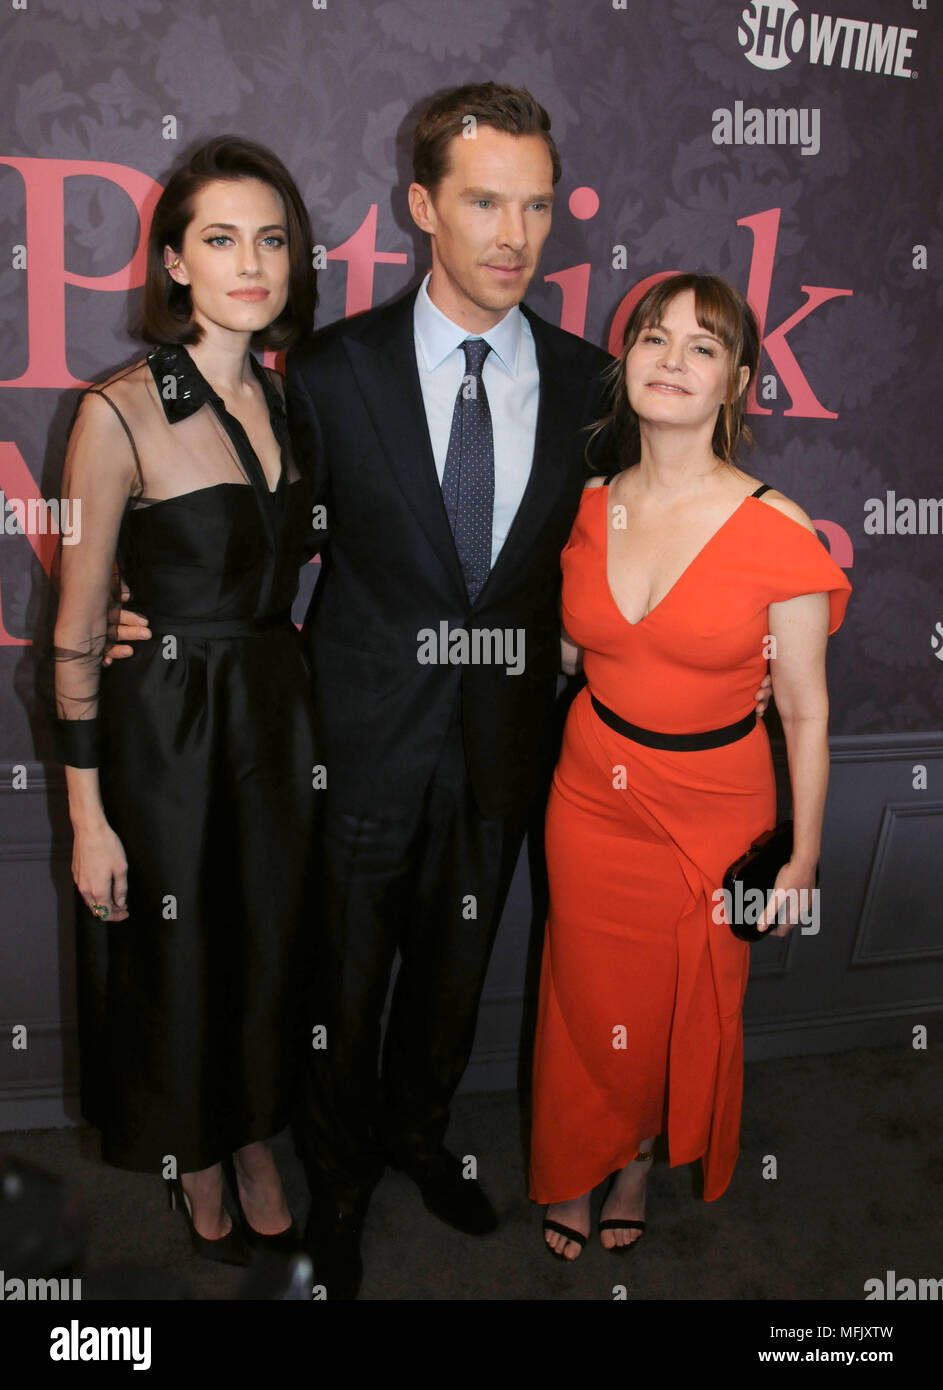 LOS ANGELES, CA - APRIL 25:  (L-R) Actress Allison Williams, actor Benedict Cumberbatch and actress Jennifer Jason Leigh attend the Premiere of Showtime's 'Patrick Melrose' at the Linwood Dunn Theater on April 25, 2018 in Los Angeles, California. Photo by Barry King/Alamy Live News Stock Photo